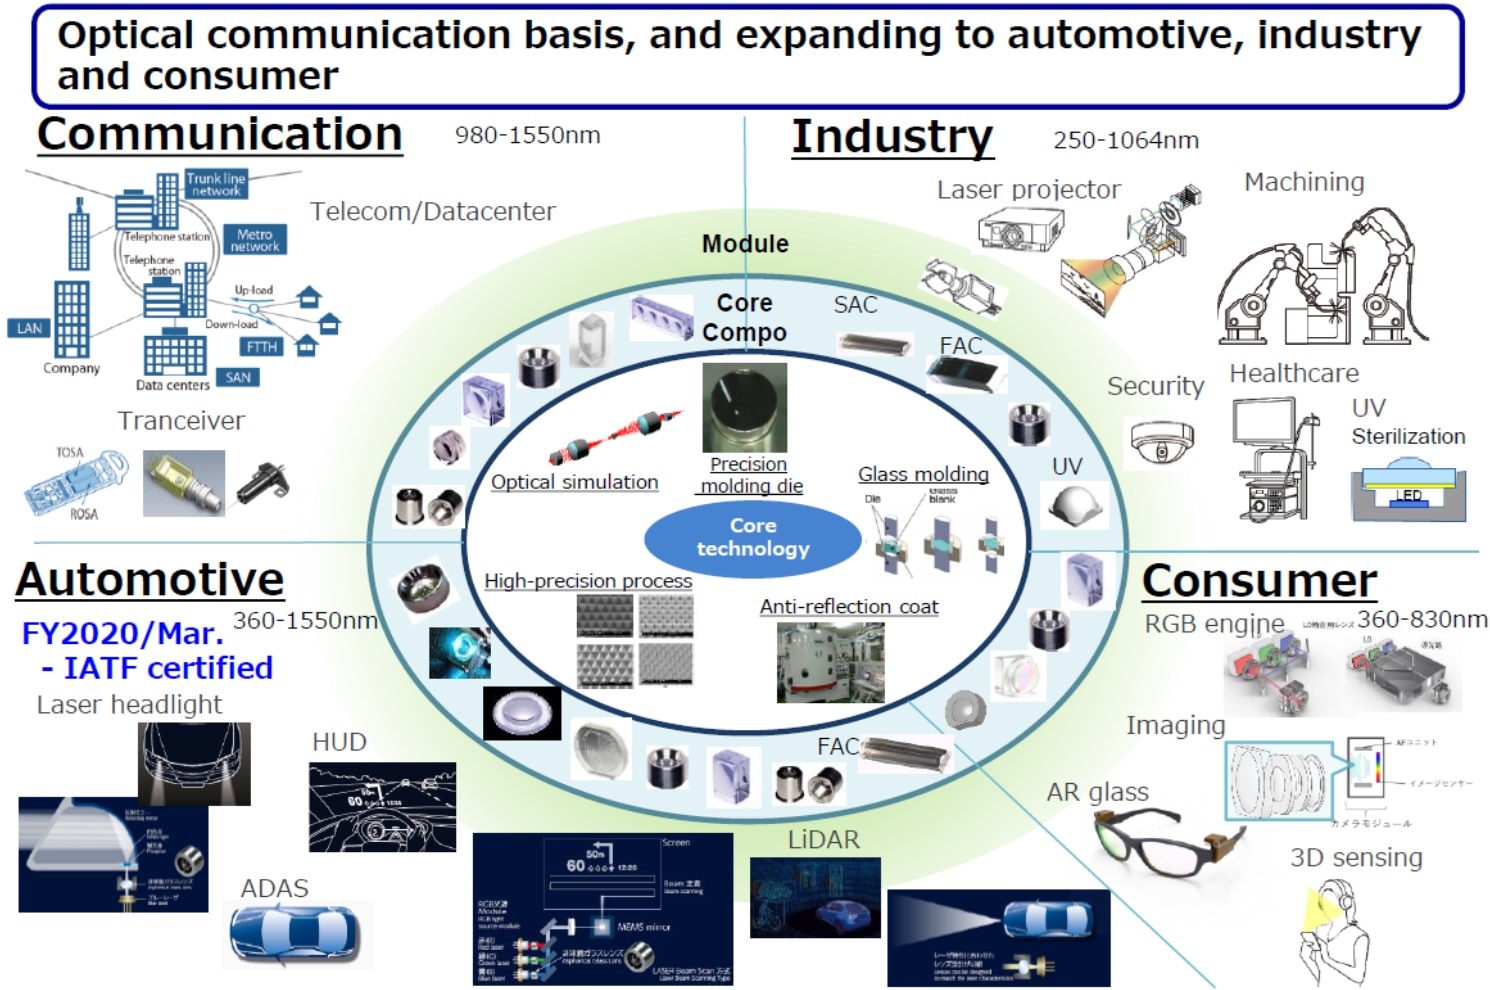 Optical communication basis, and expanding to automotive, industry and consumer